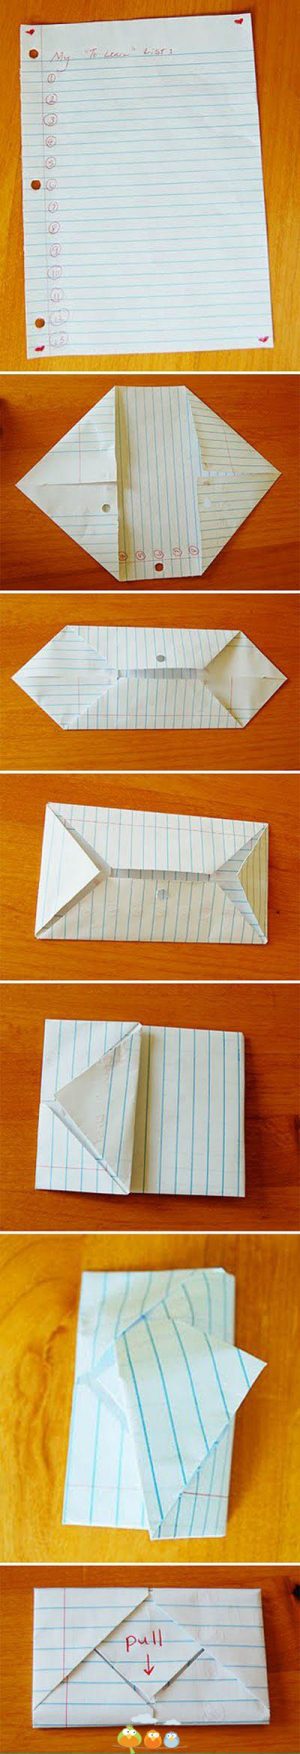 Origami Envelopes & Letter Folding How To Fold A Pull Tab Style Note Diy Pinterest Origami